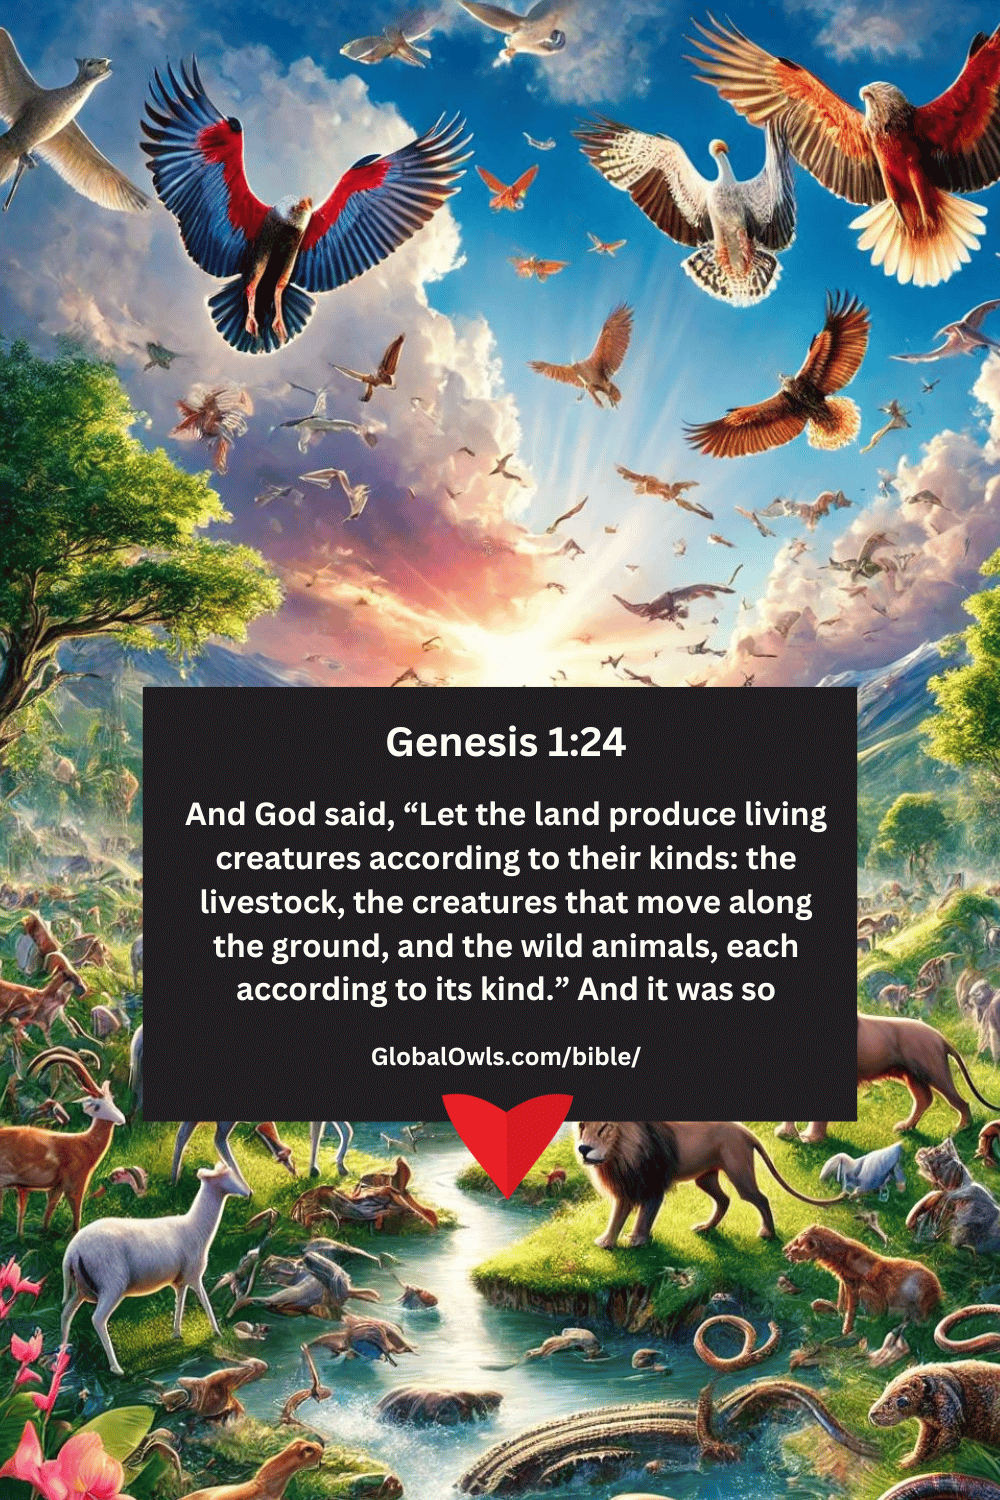 Genesis 1-24 And God said, “Let the land produce living creatures according to their kinds the livestock, the creatures that move along the ground, and the wild animals, each according to its kind